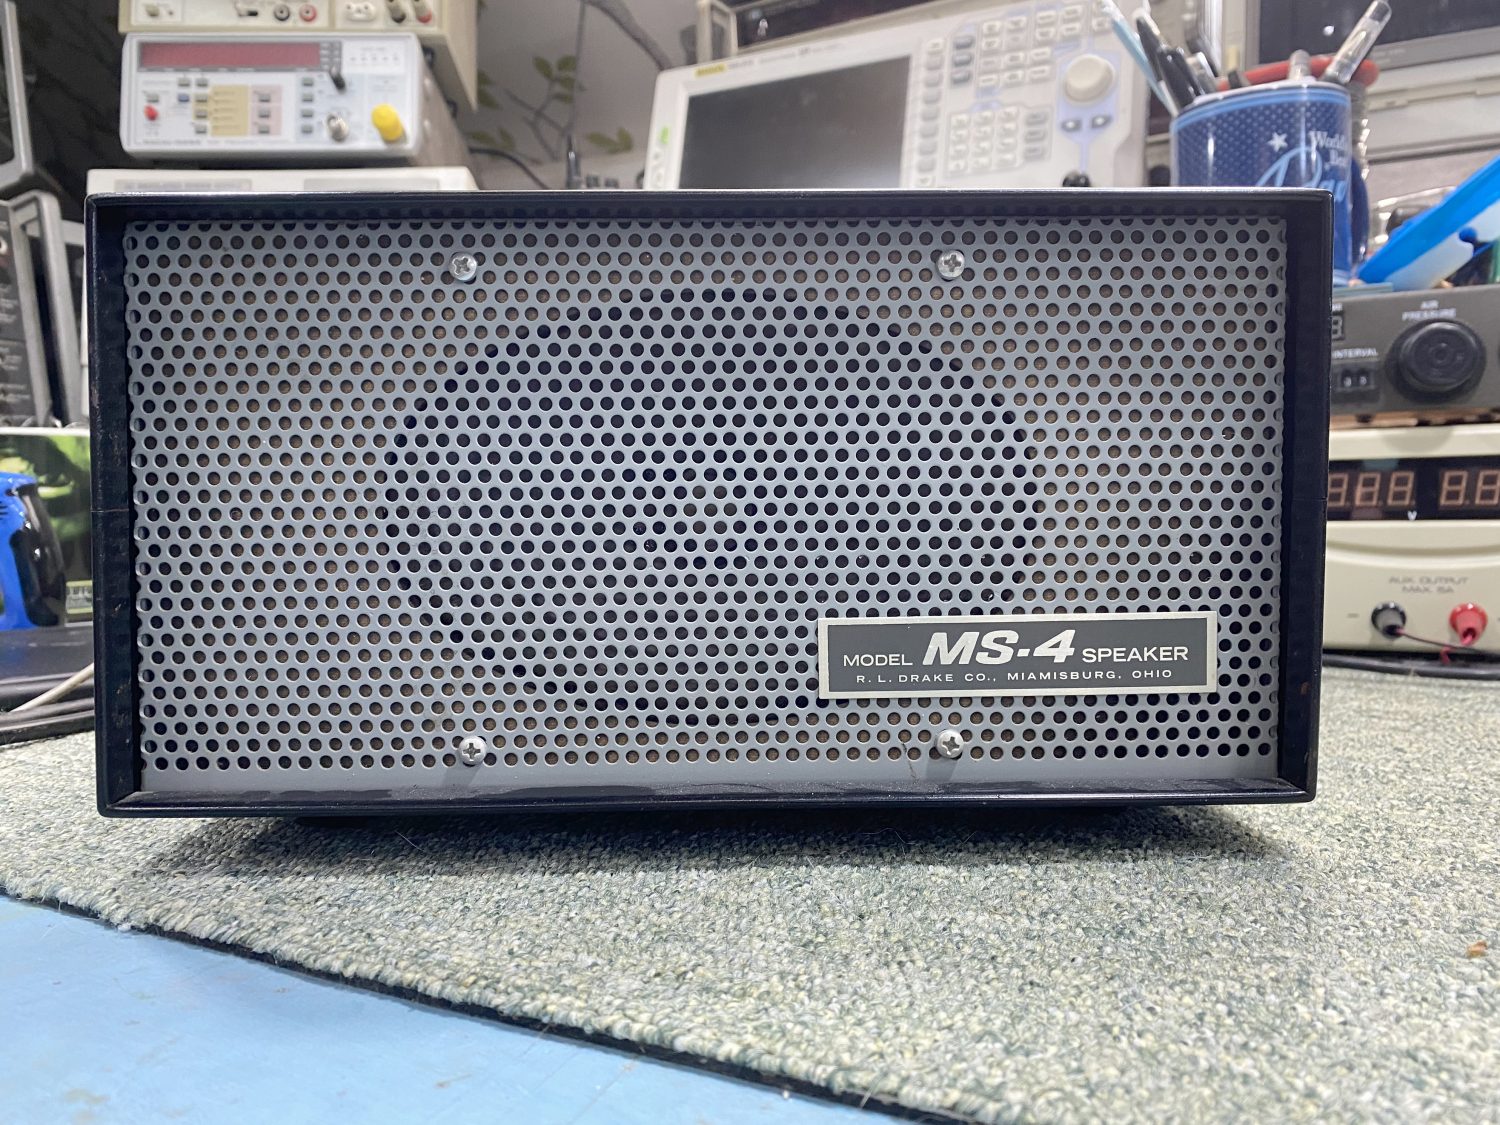 Drake MS-4 Speaker Unit with Built-in AC-4 Power Supply (MS-4 #2)